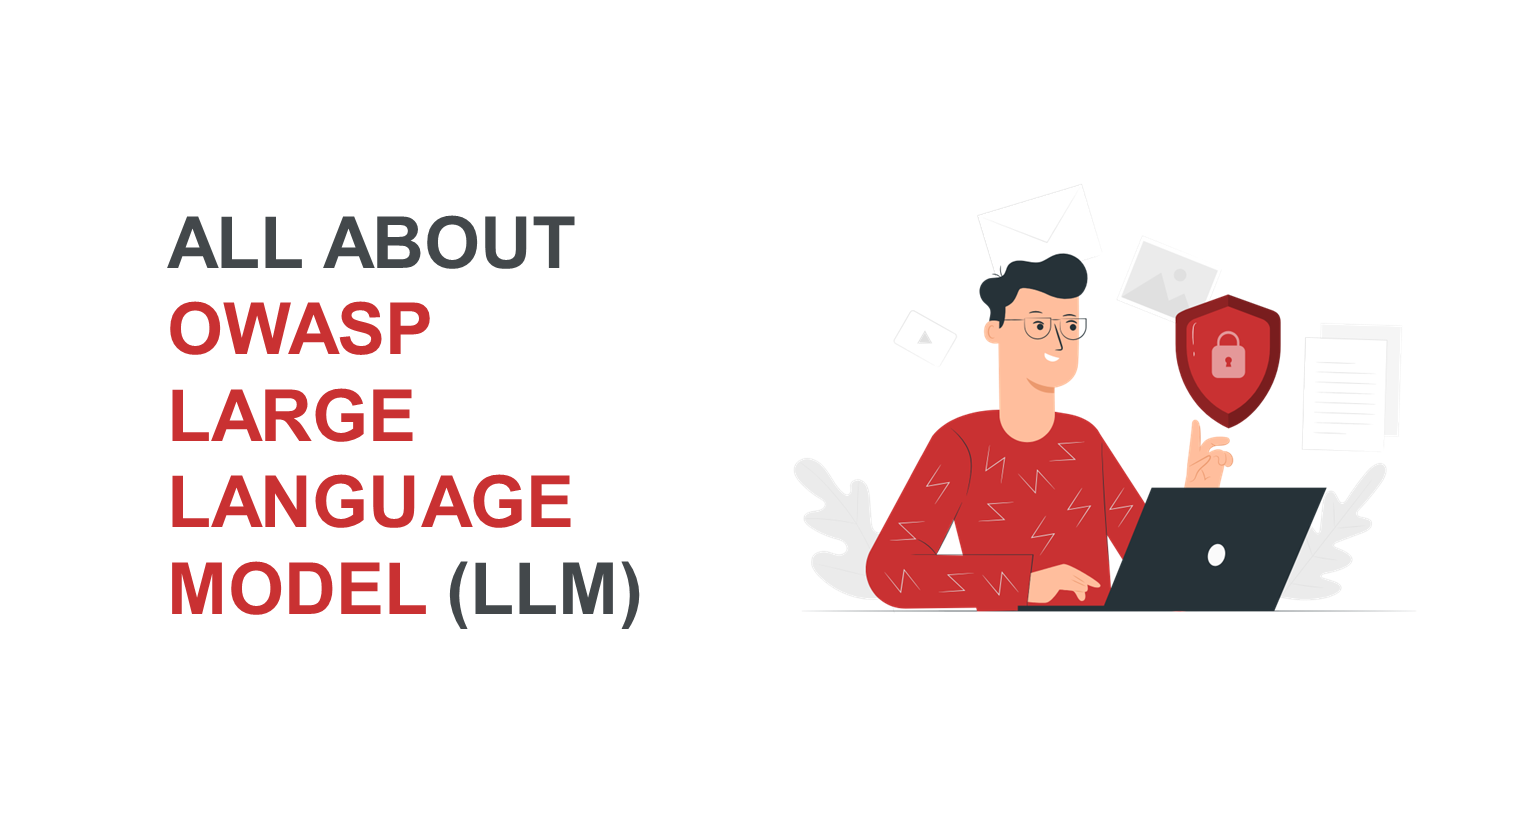 All About OWASP Large Language Model (LLM) 